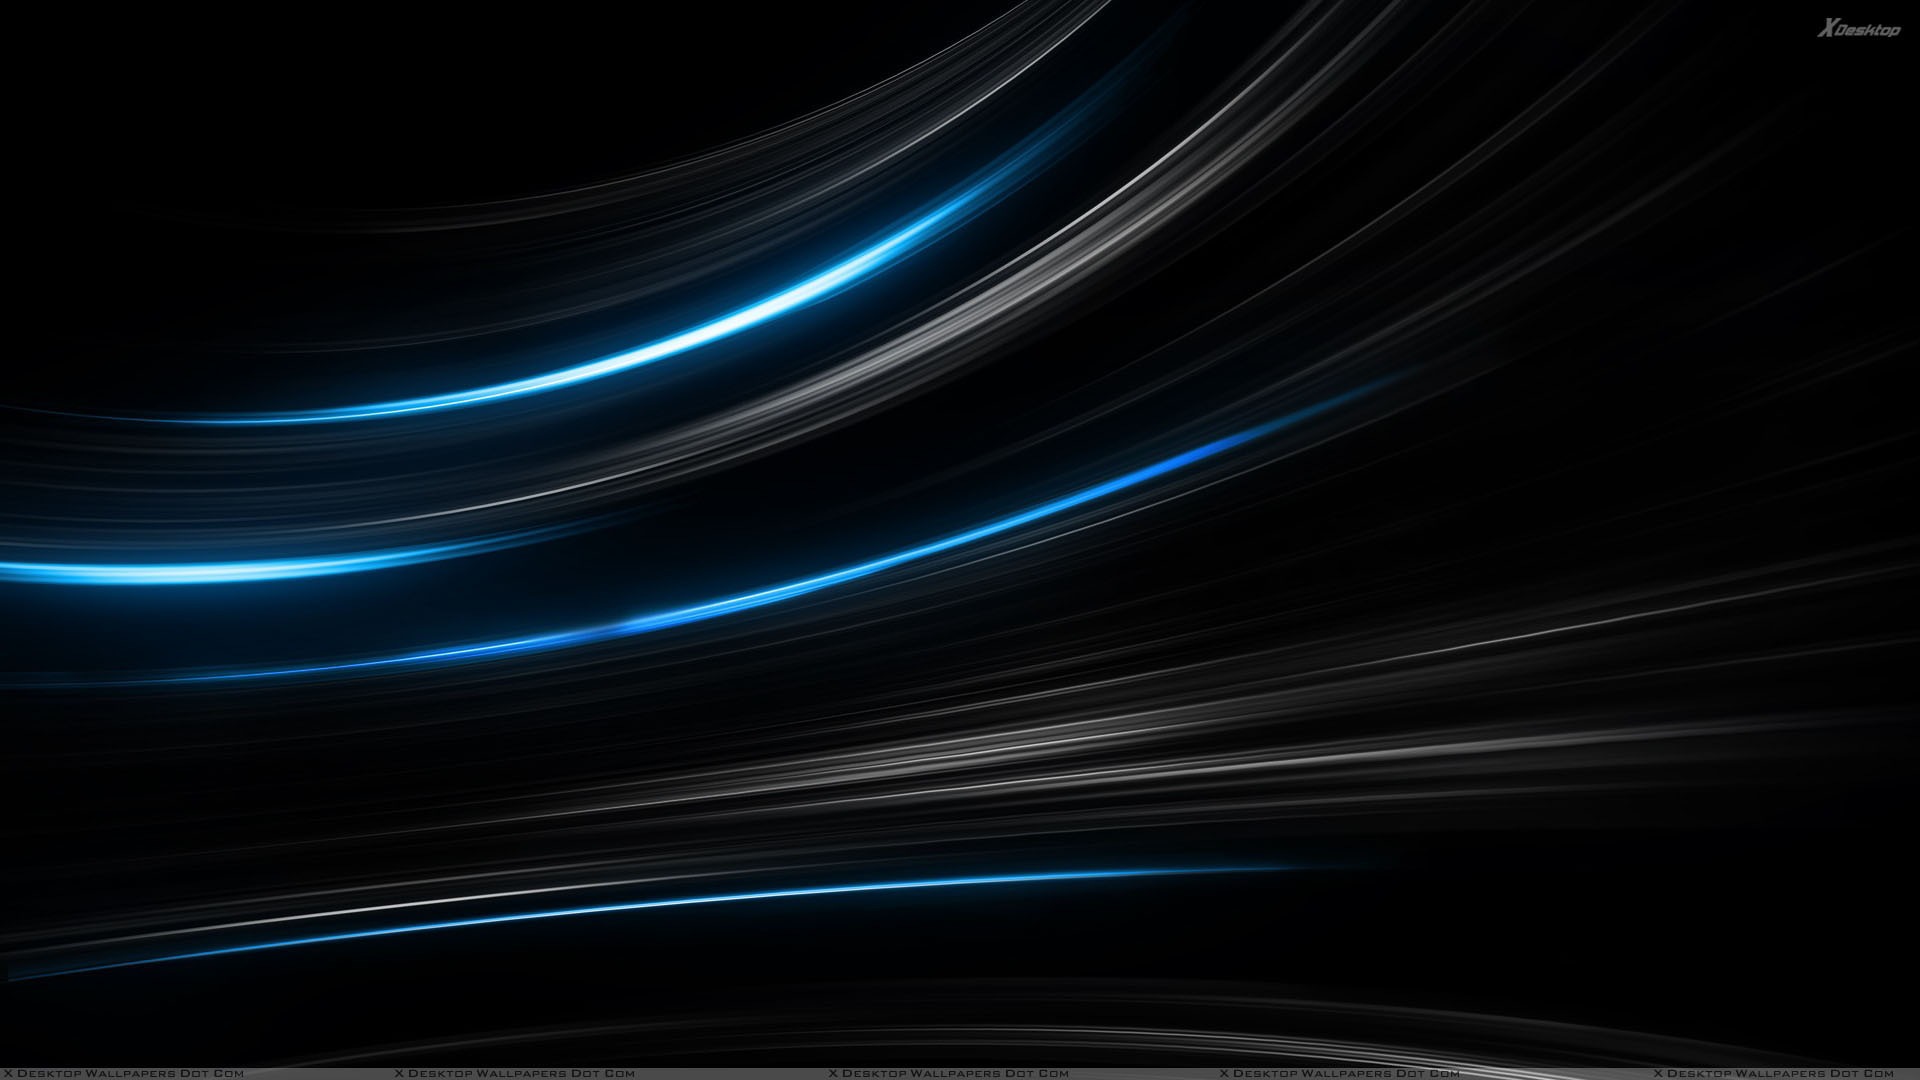 1920x1080 Blue And Black Shade Background Wallpaper